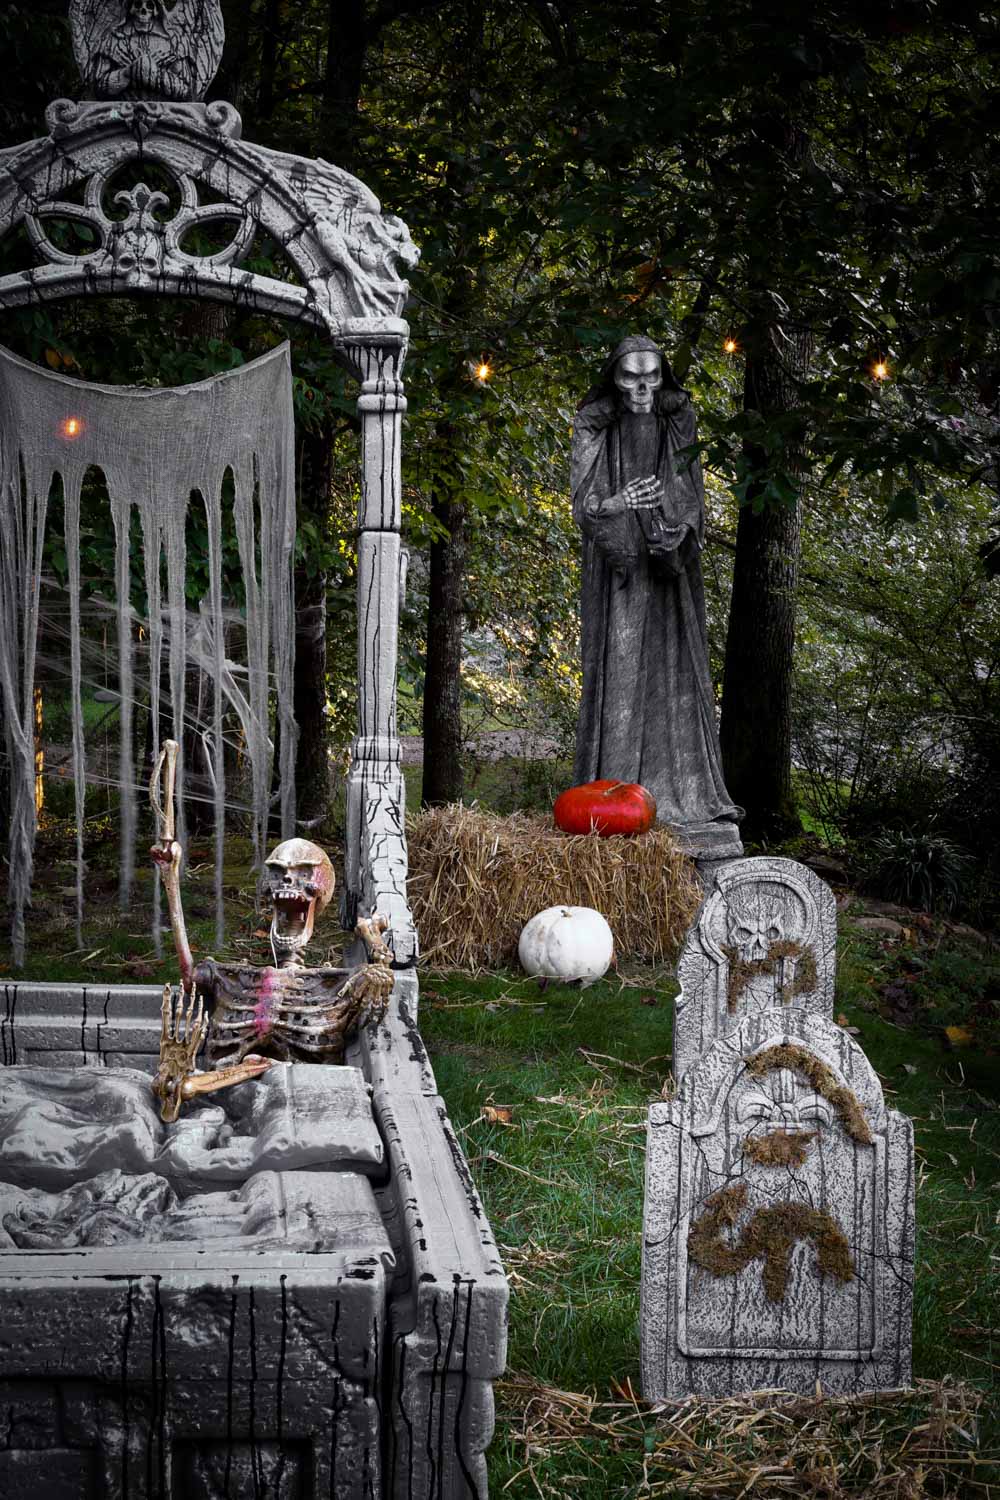 A spooky cemetery statue holding an hourglass standing behind a crypt and tombstone.